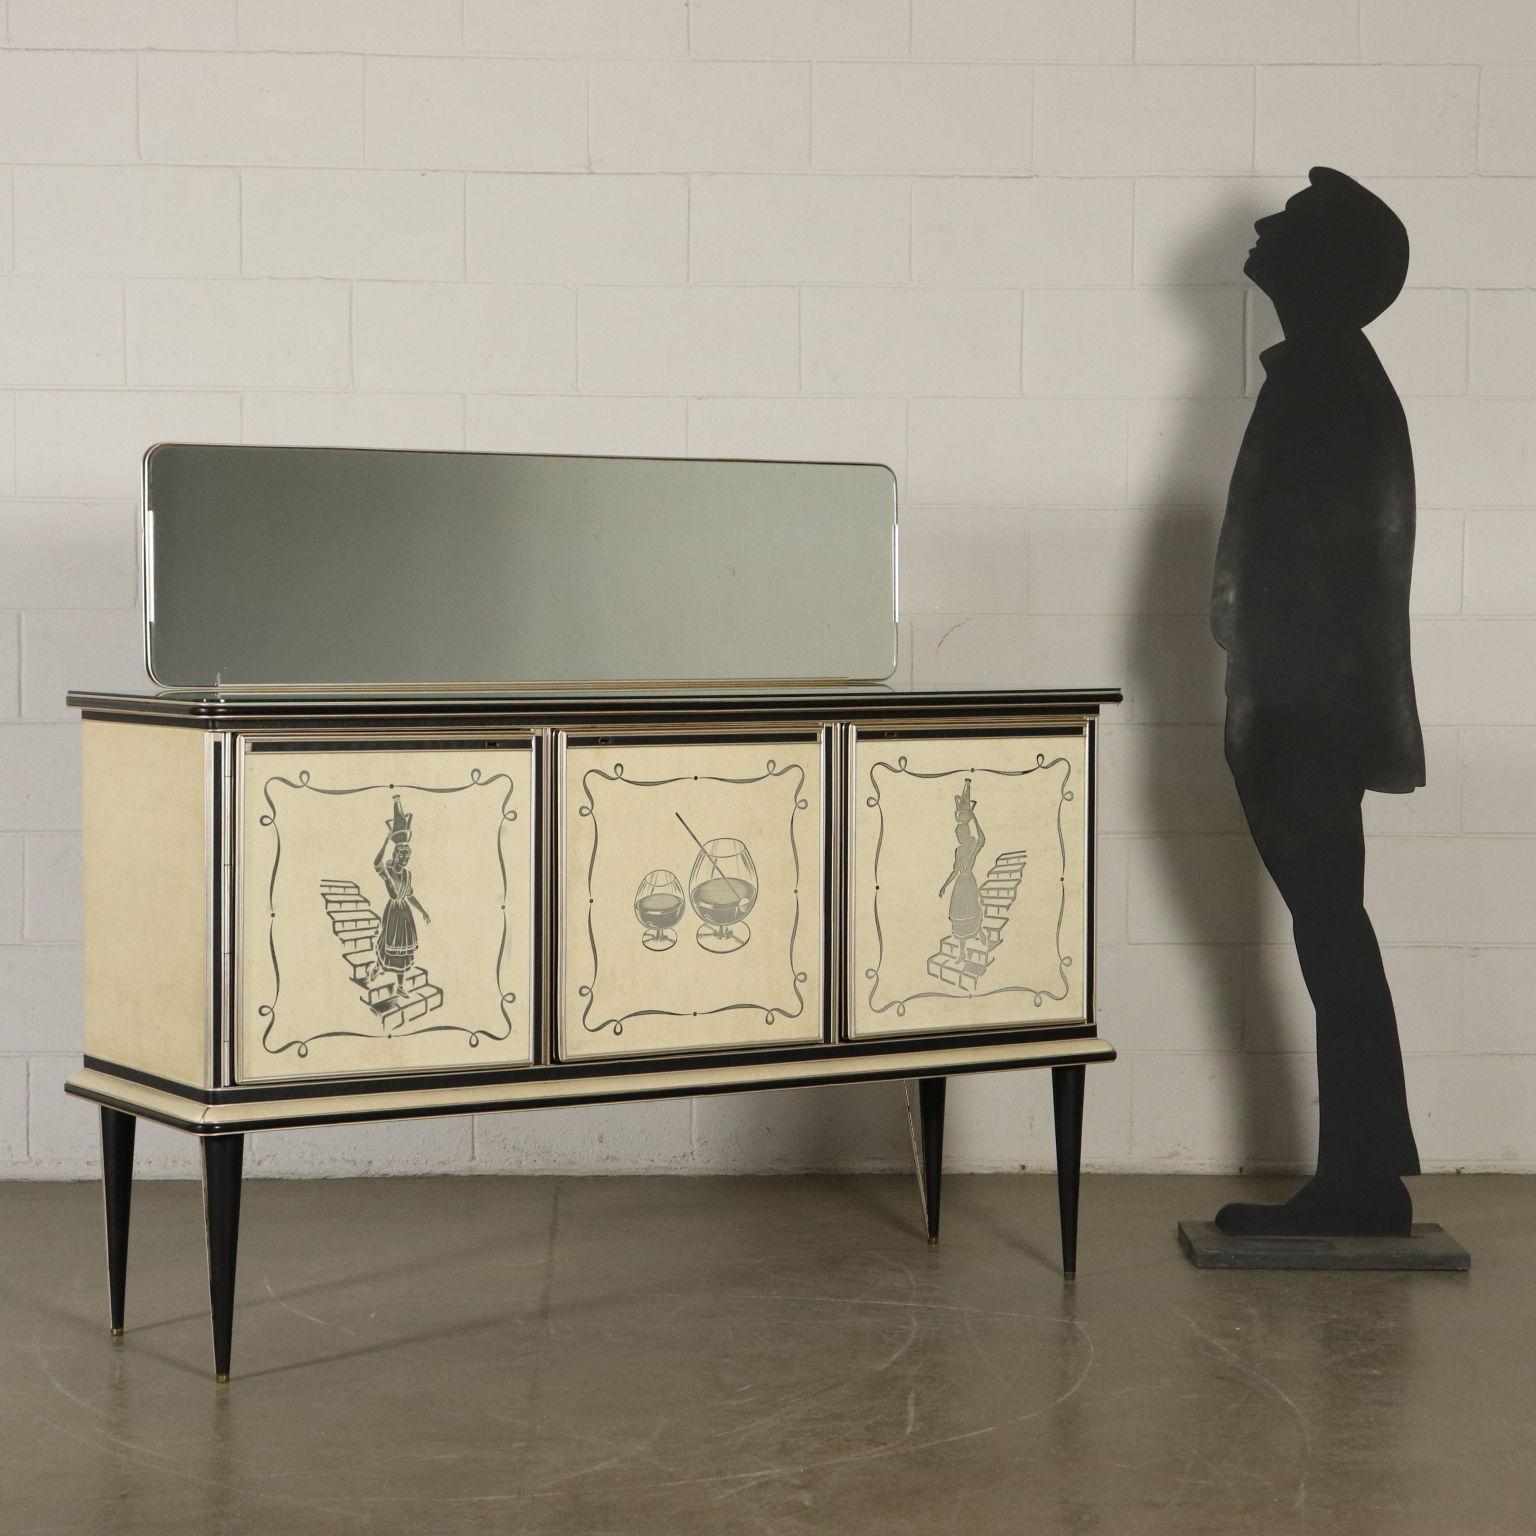 Buffet with mirror designed by Umberto Mascagni. Wood covered with vinyl material, decorated glass and aluminium outlines. Manufactured in Italy, 1950s.